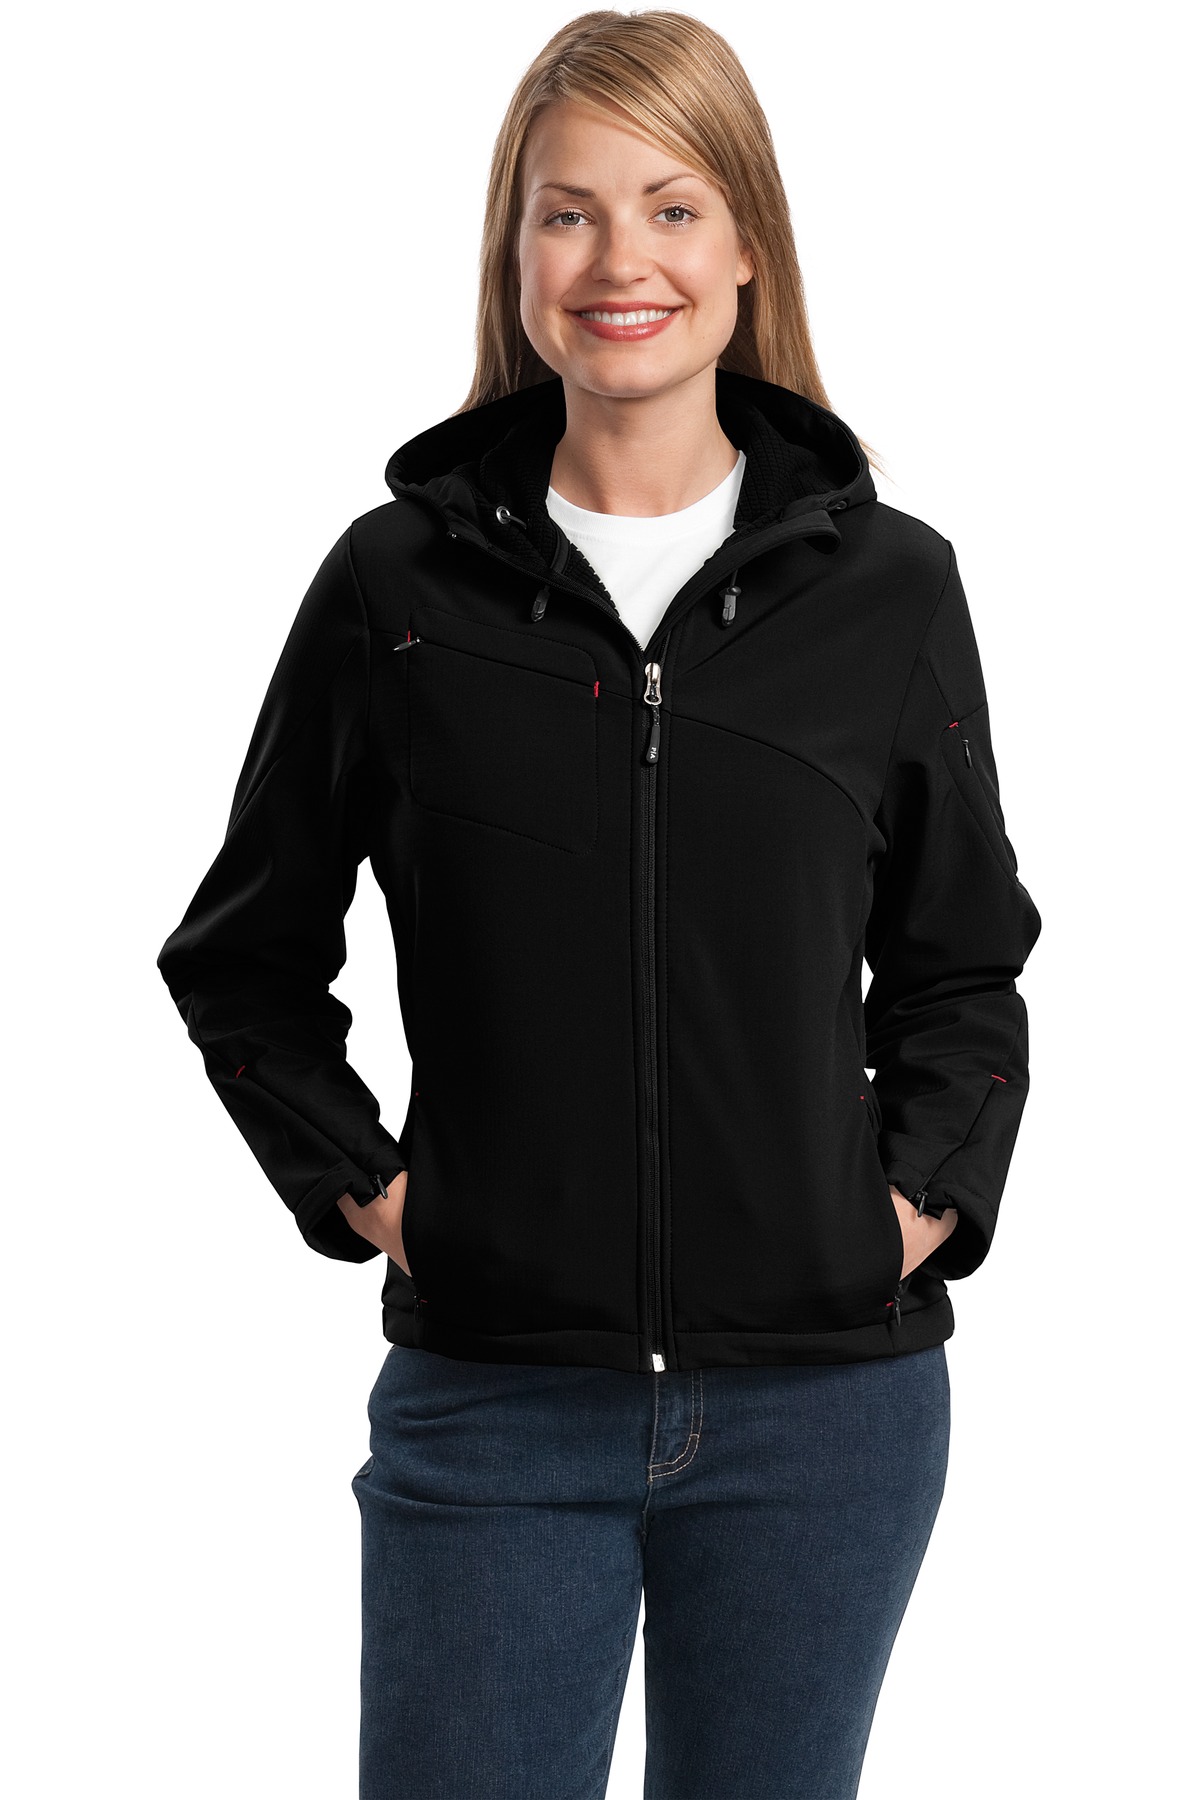 Port Authority L706 Ladies Textured Hooded Soft Shell Jacket - image 1 of 2